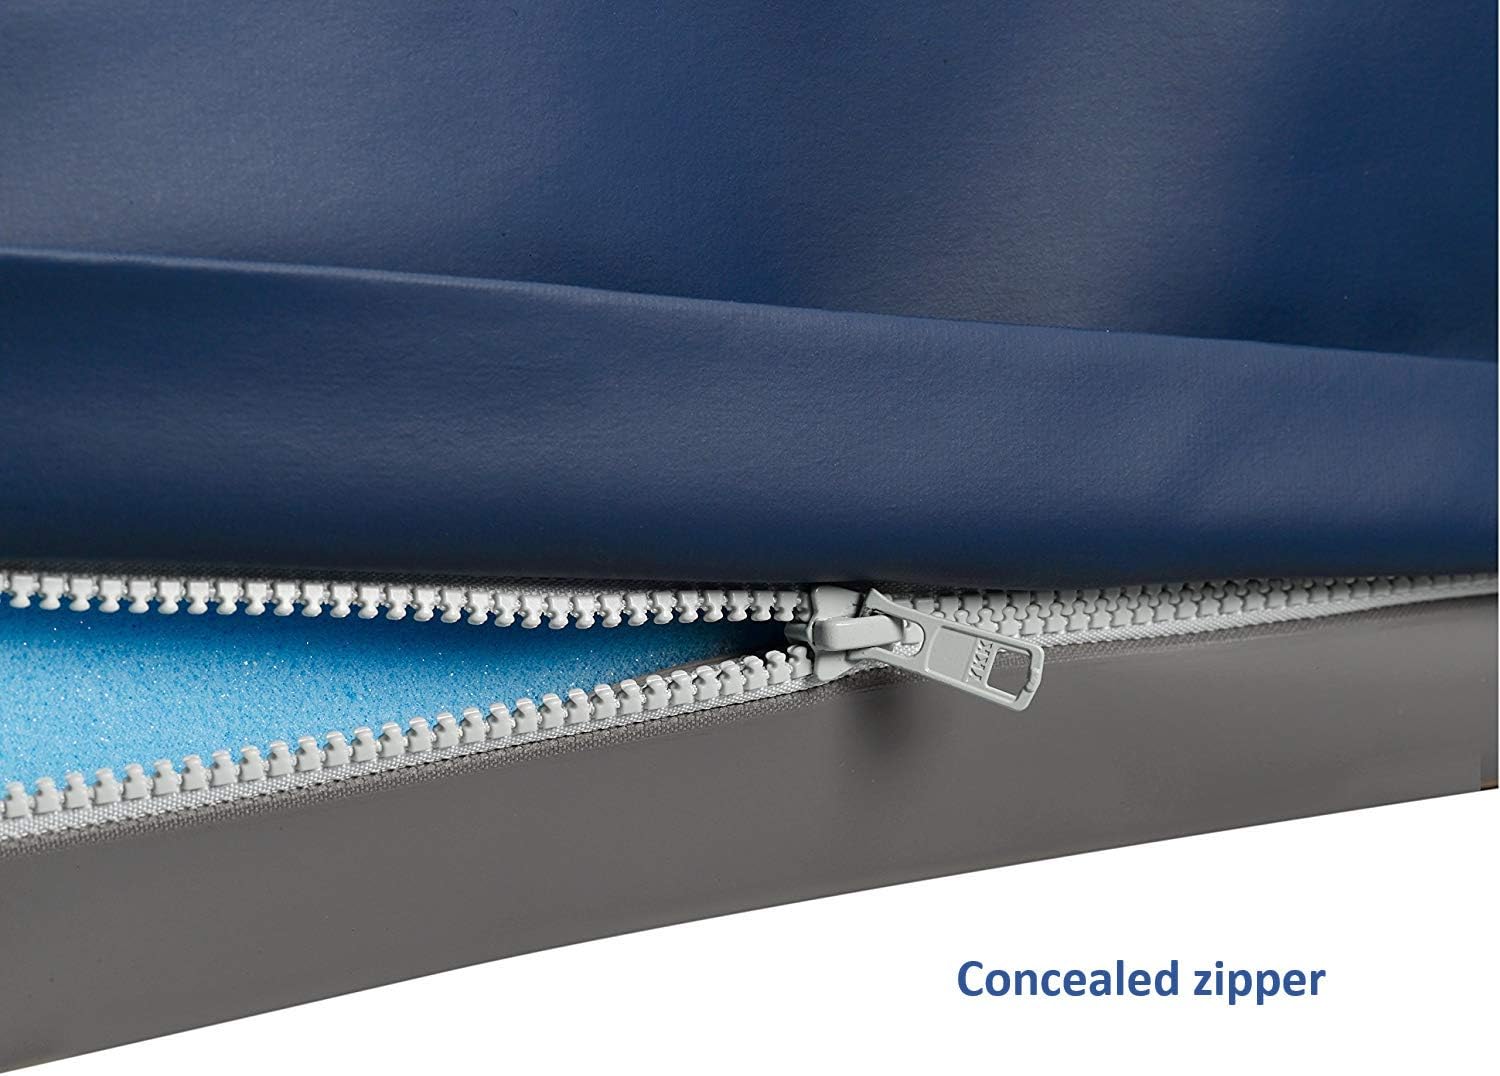 Invacare's Softform Premier Hospital mattress, item number IPM1080 displays a concealed zipper.  The image is against a white background.